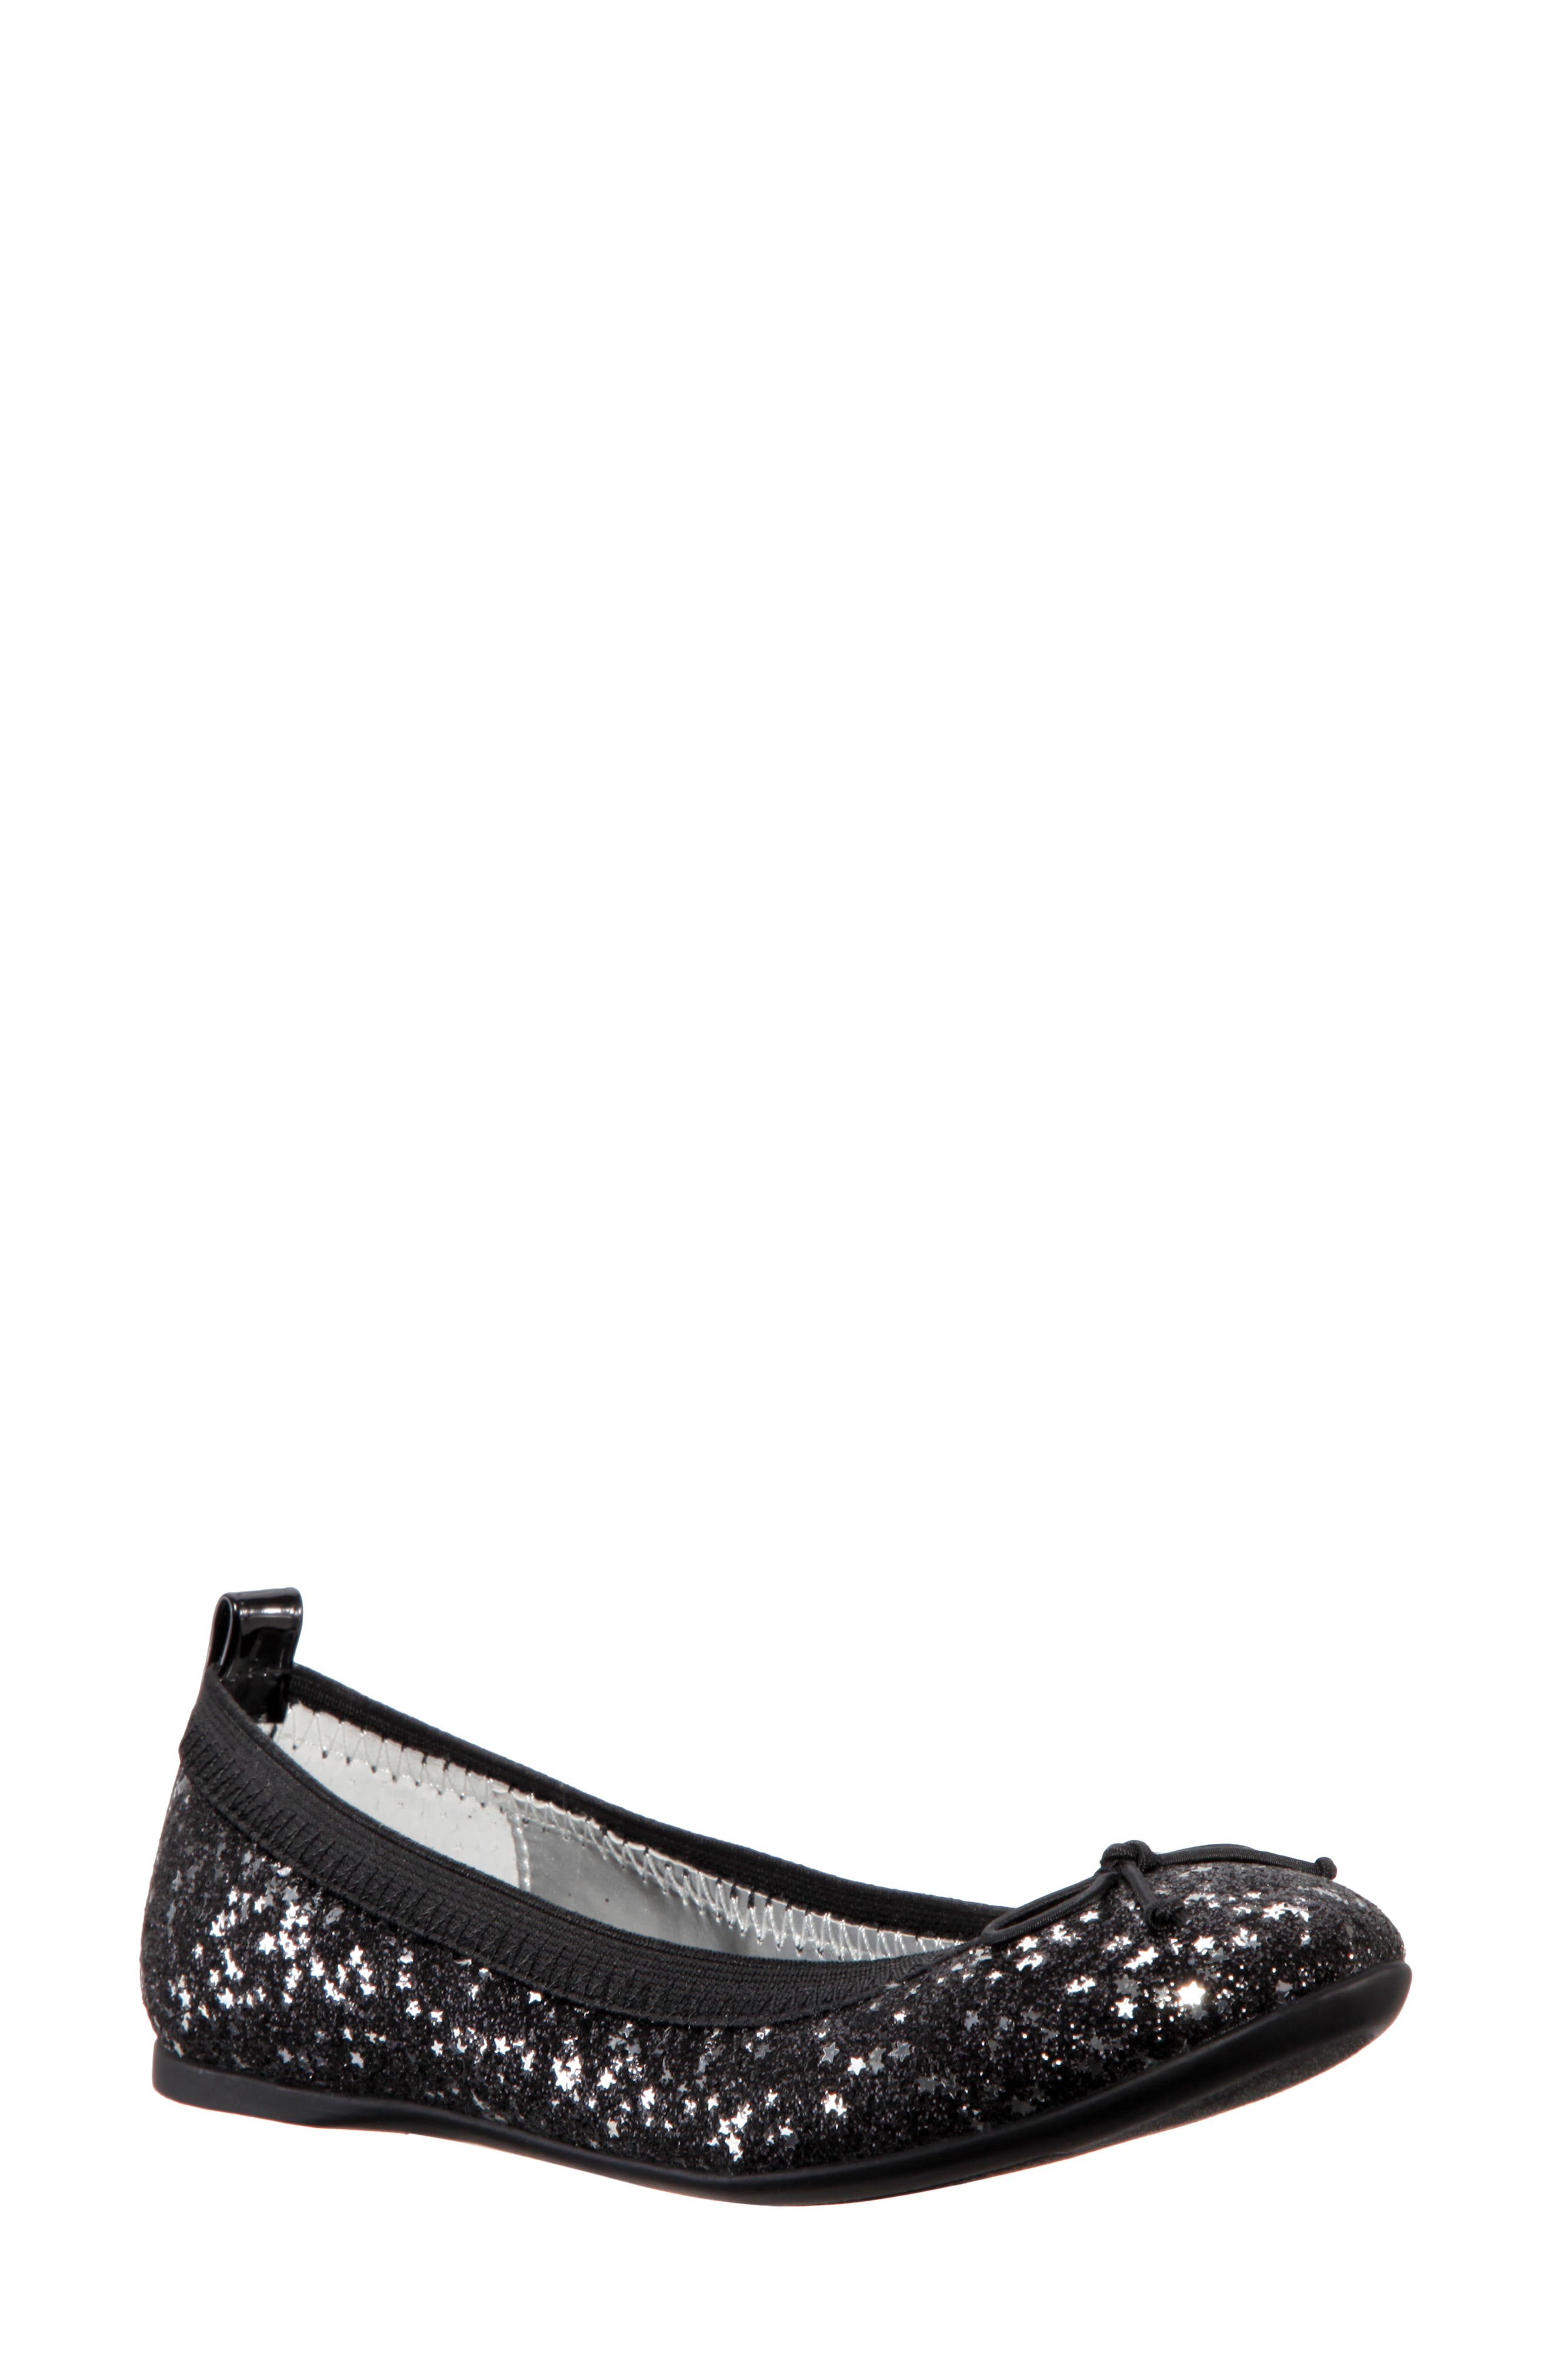 Details about   New Link Kids Girl's Black Glitter Flat Shoes 12 & 13 